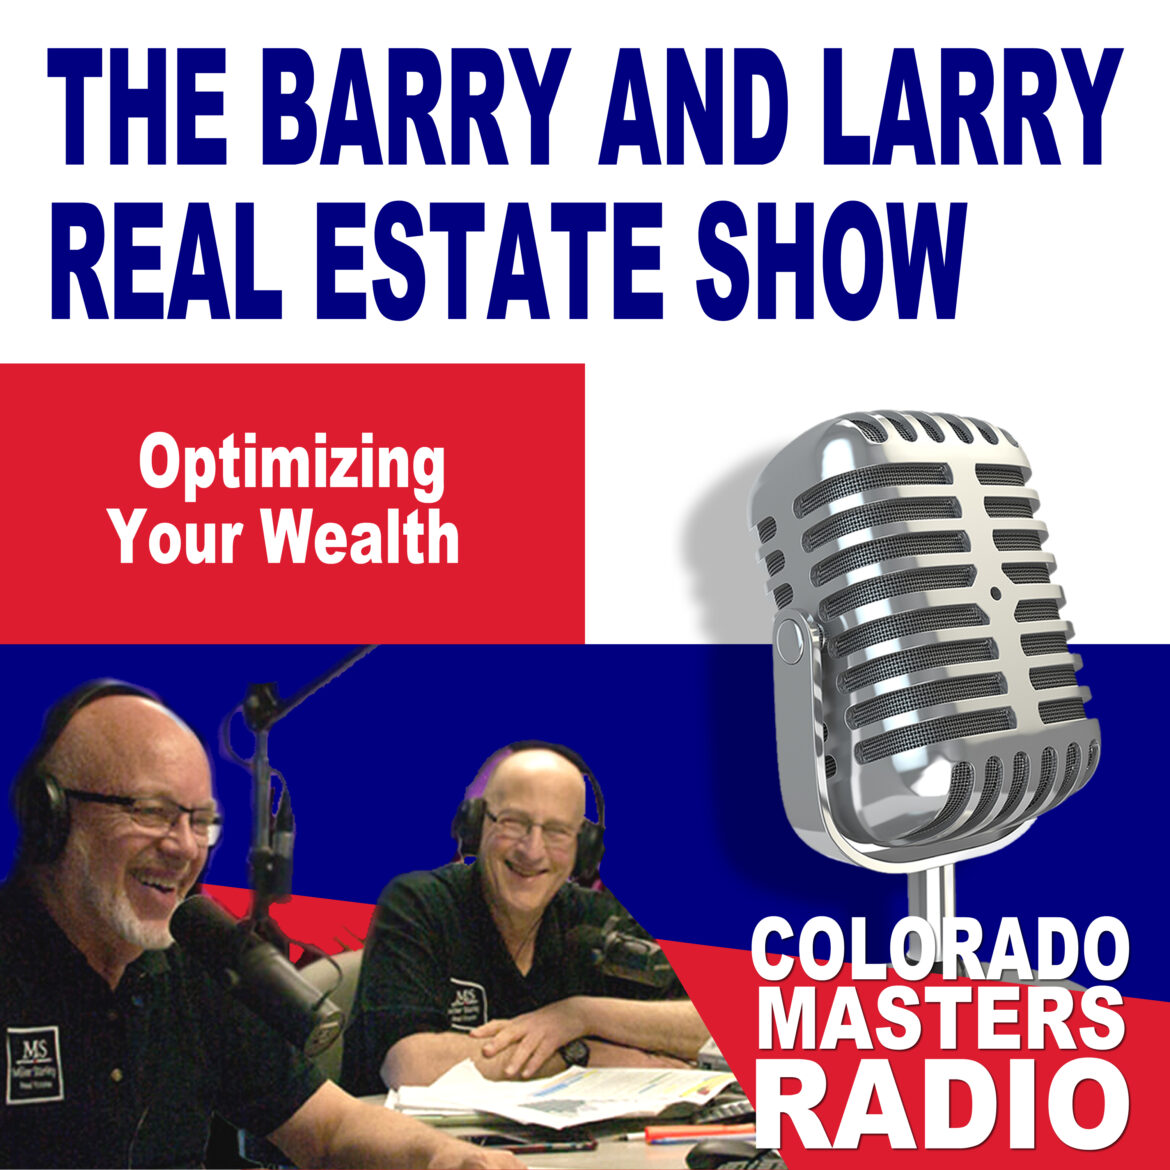 The Larry and Barry Real Estate Show - Optimizing your Wealth